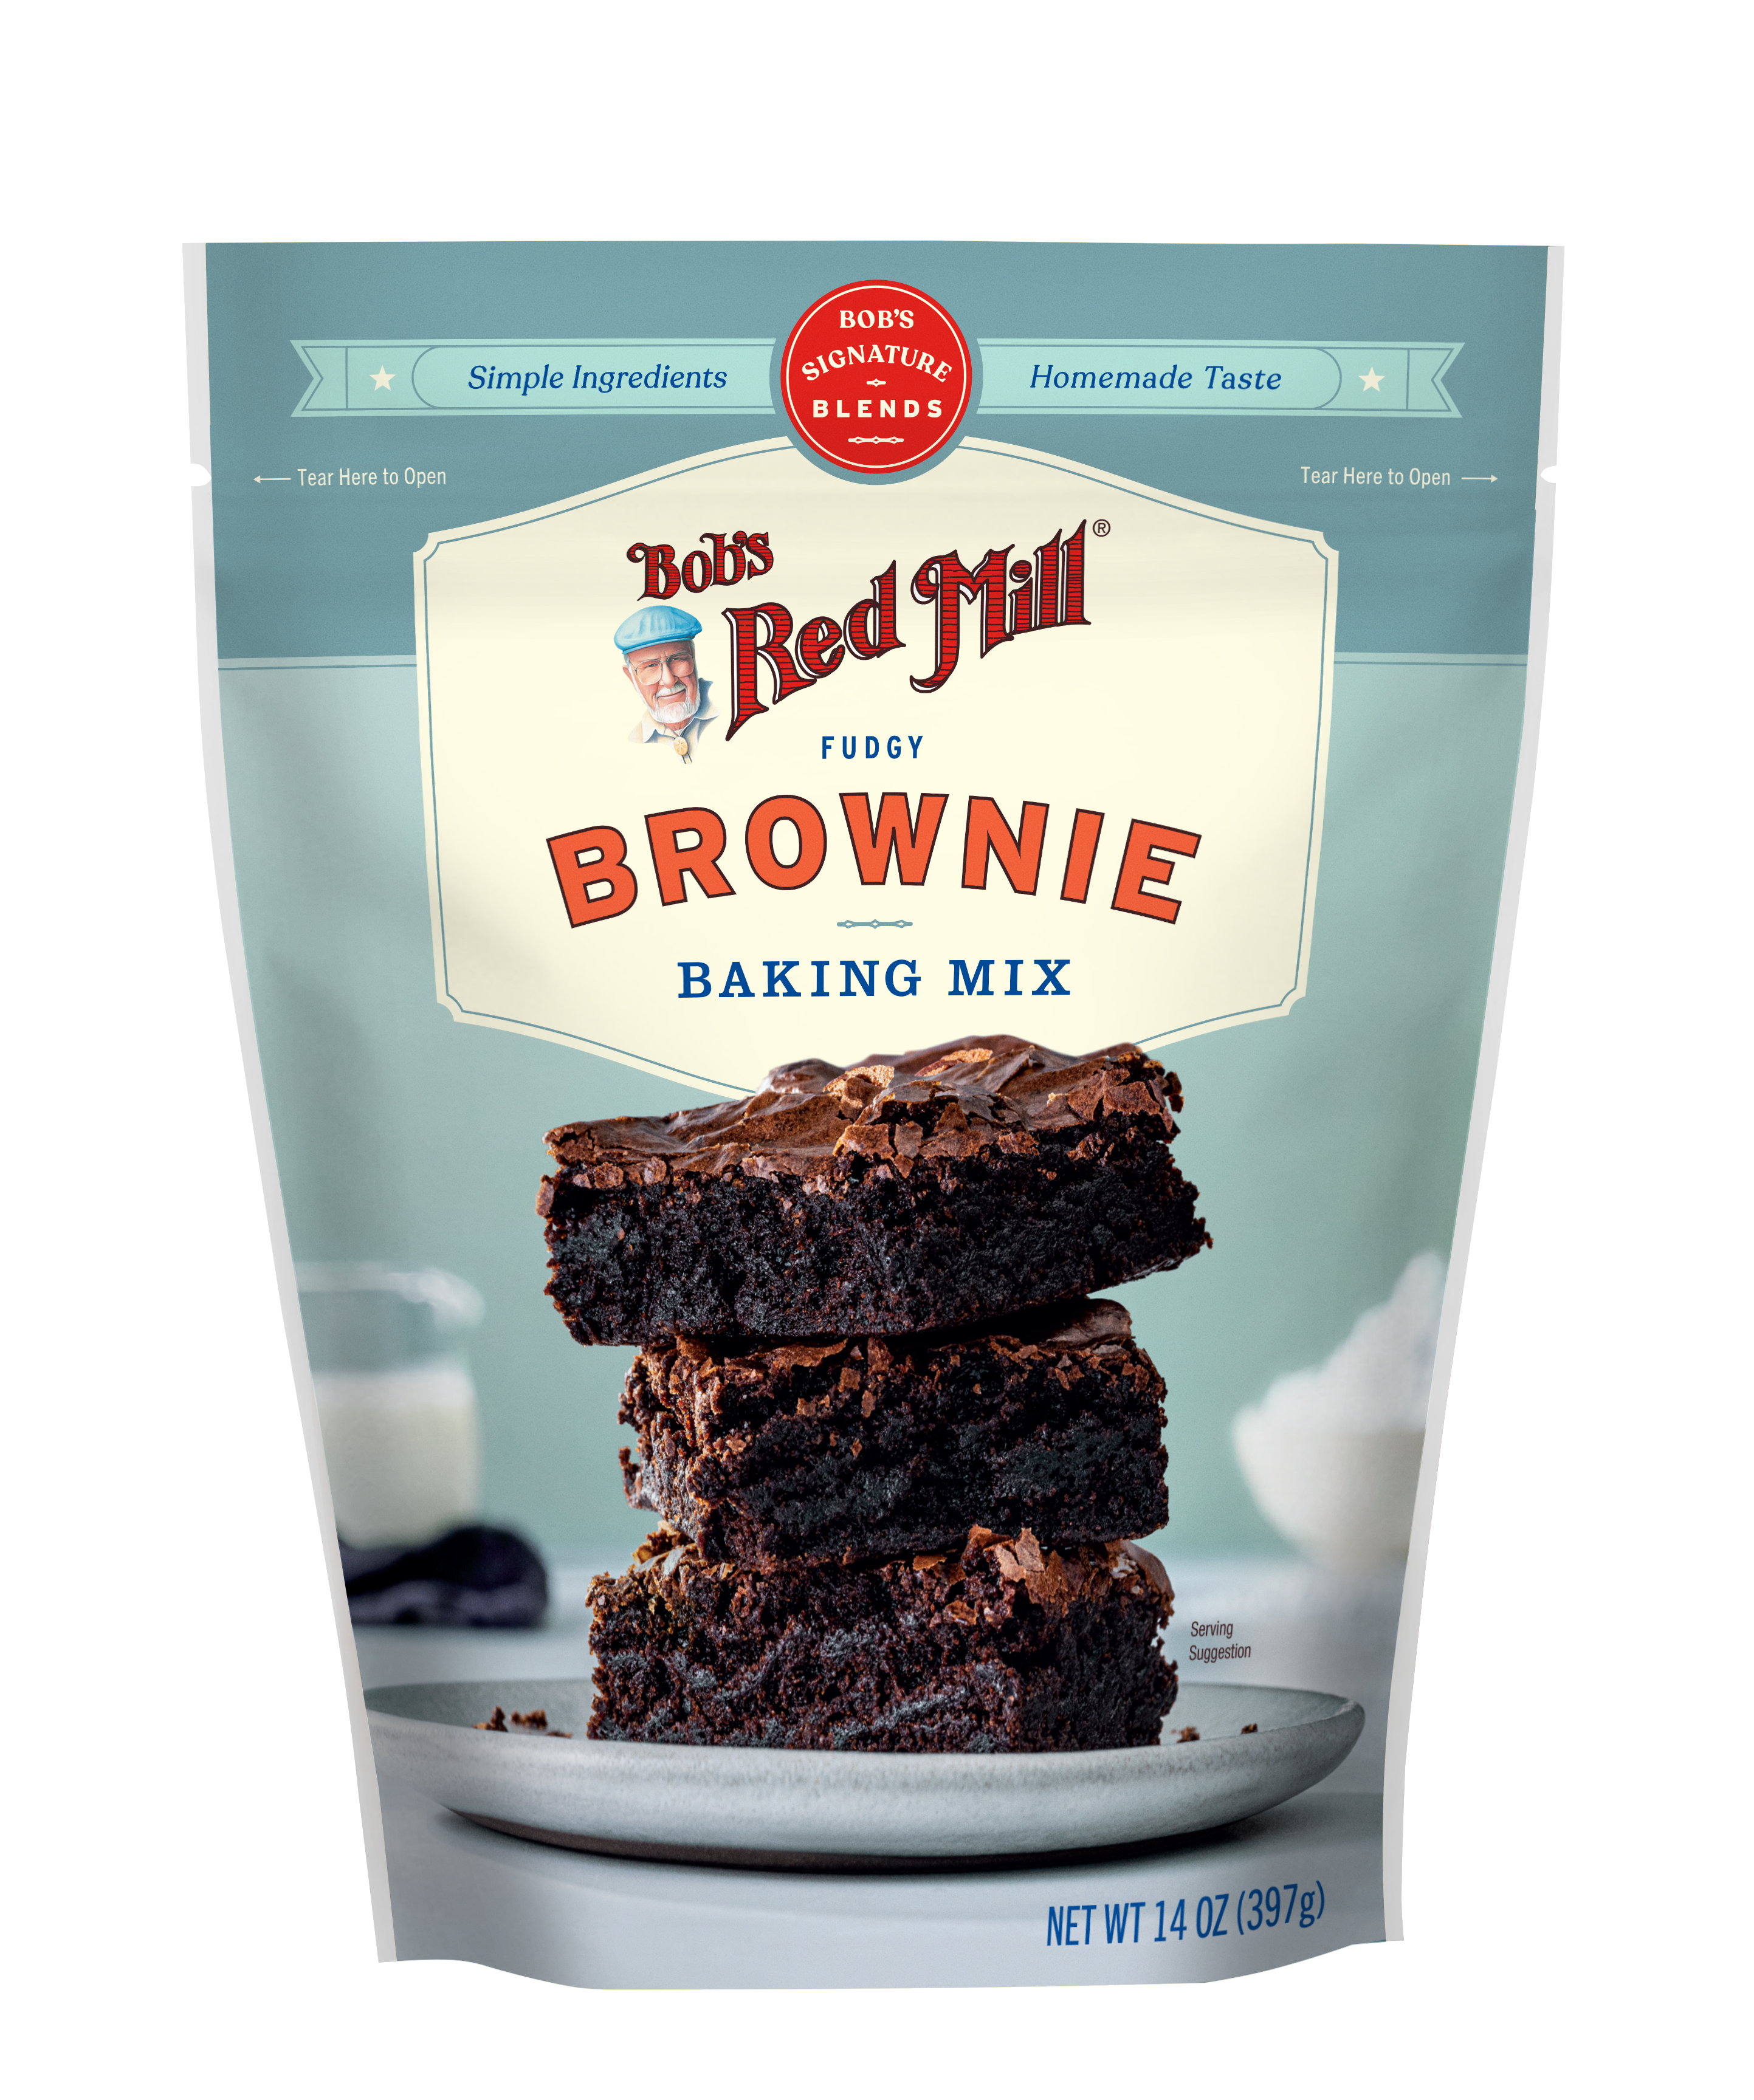 Brownie Baking Mix Signature Blends - Front